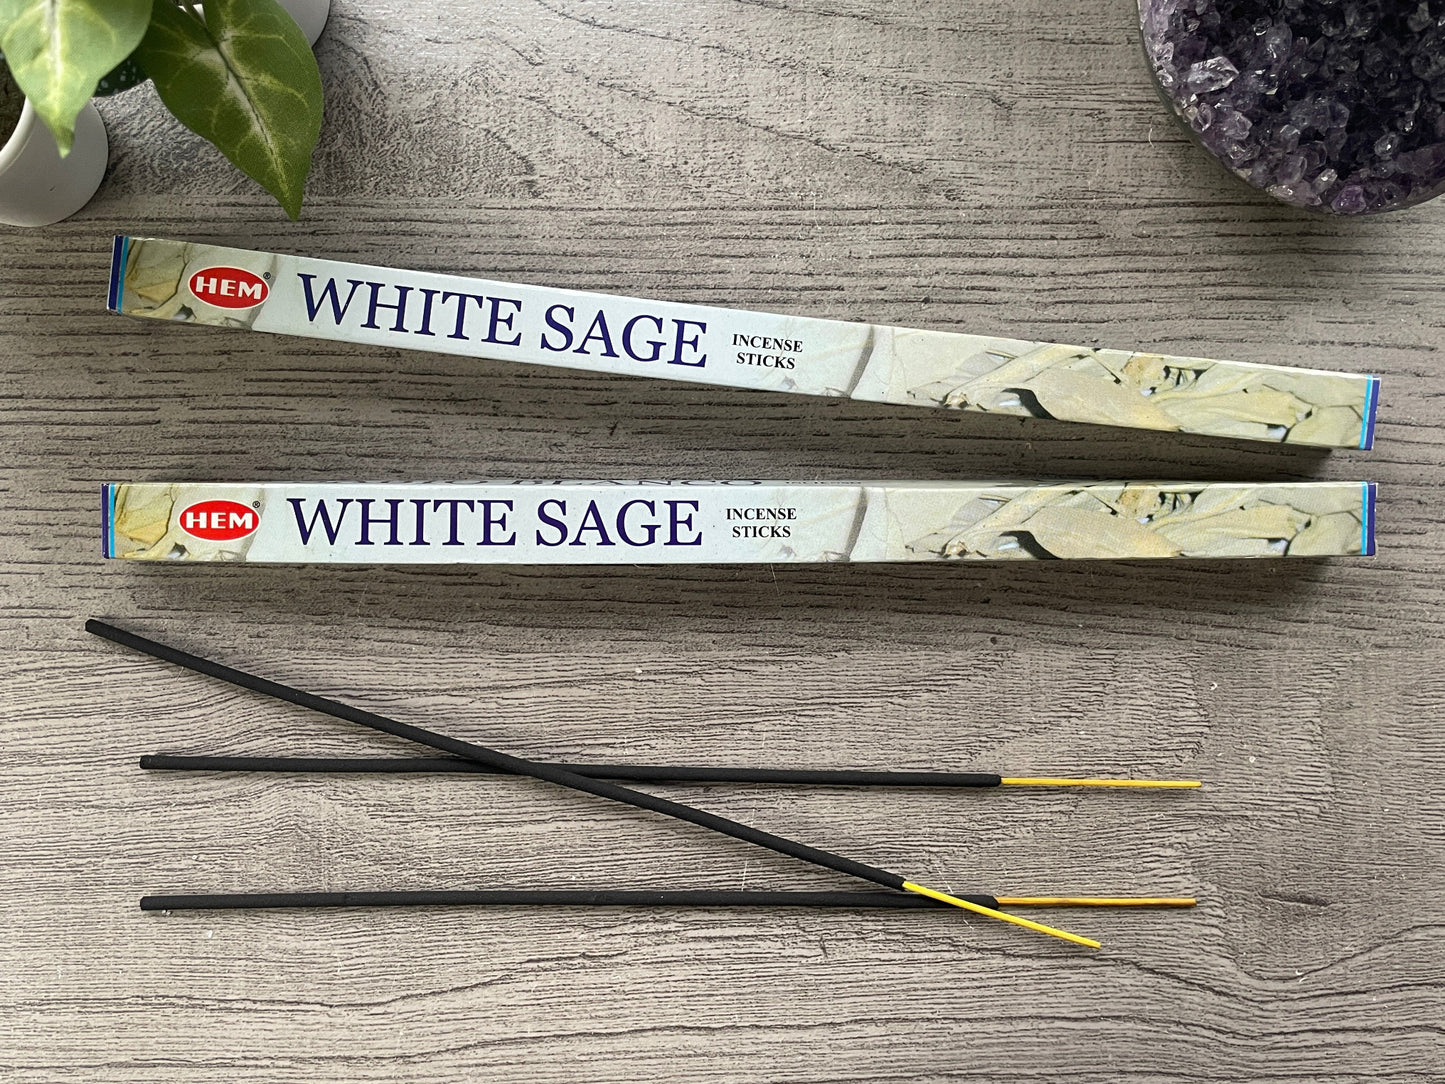 Pictured is a box of white sage incense.